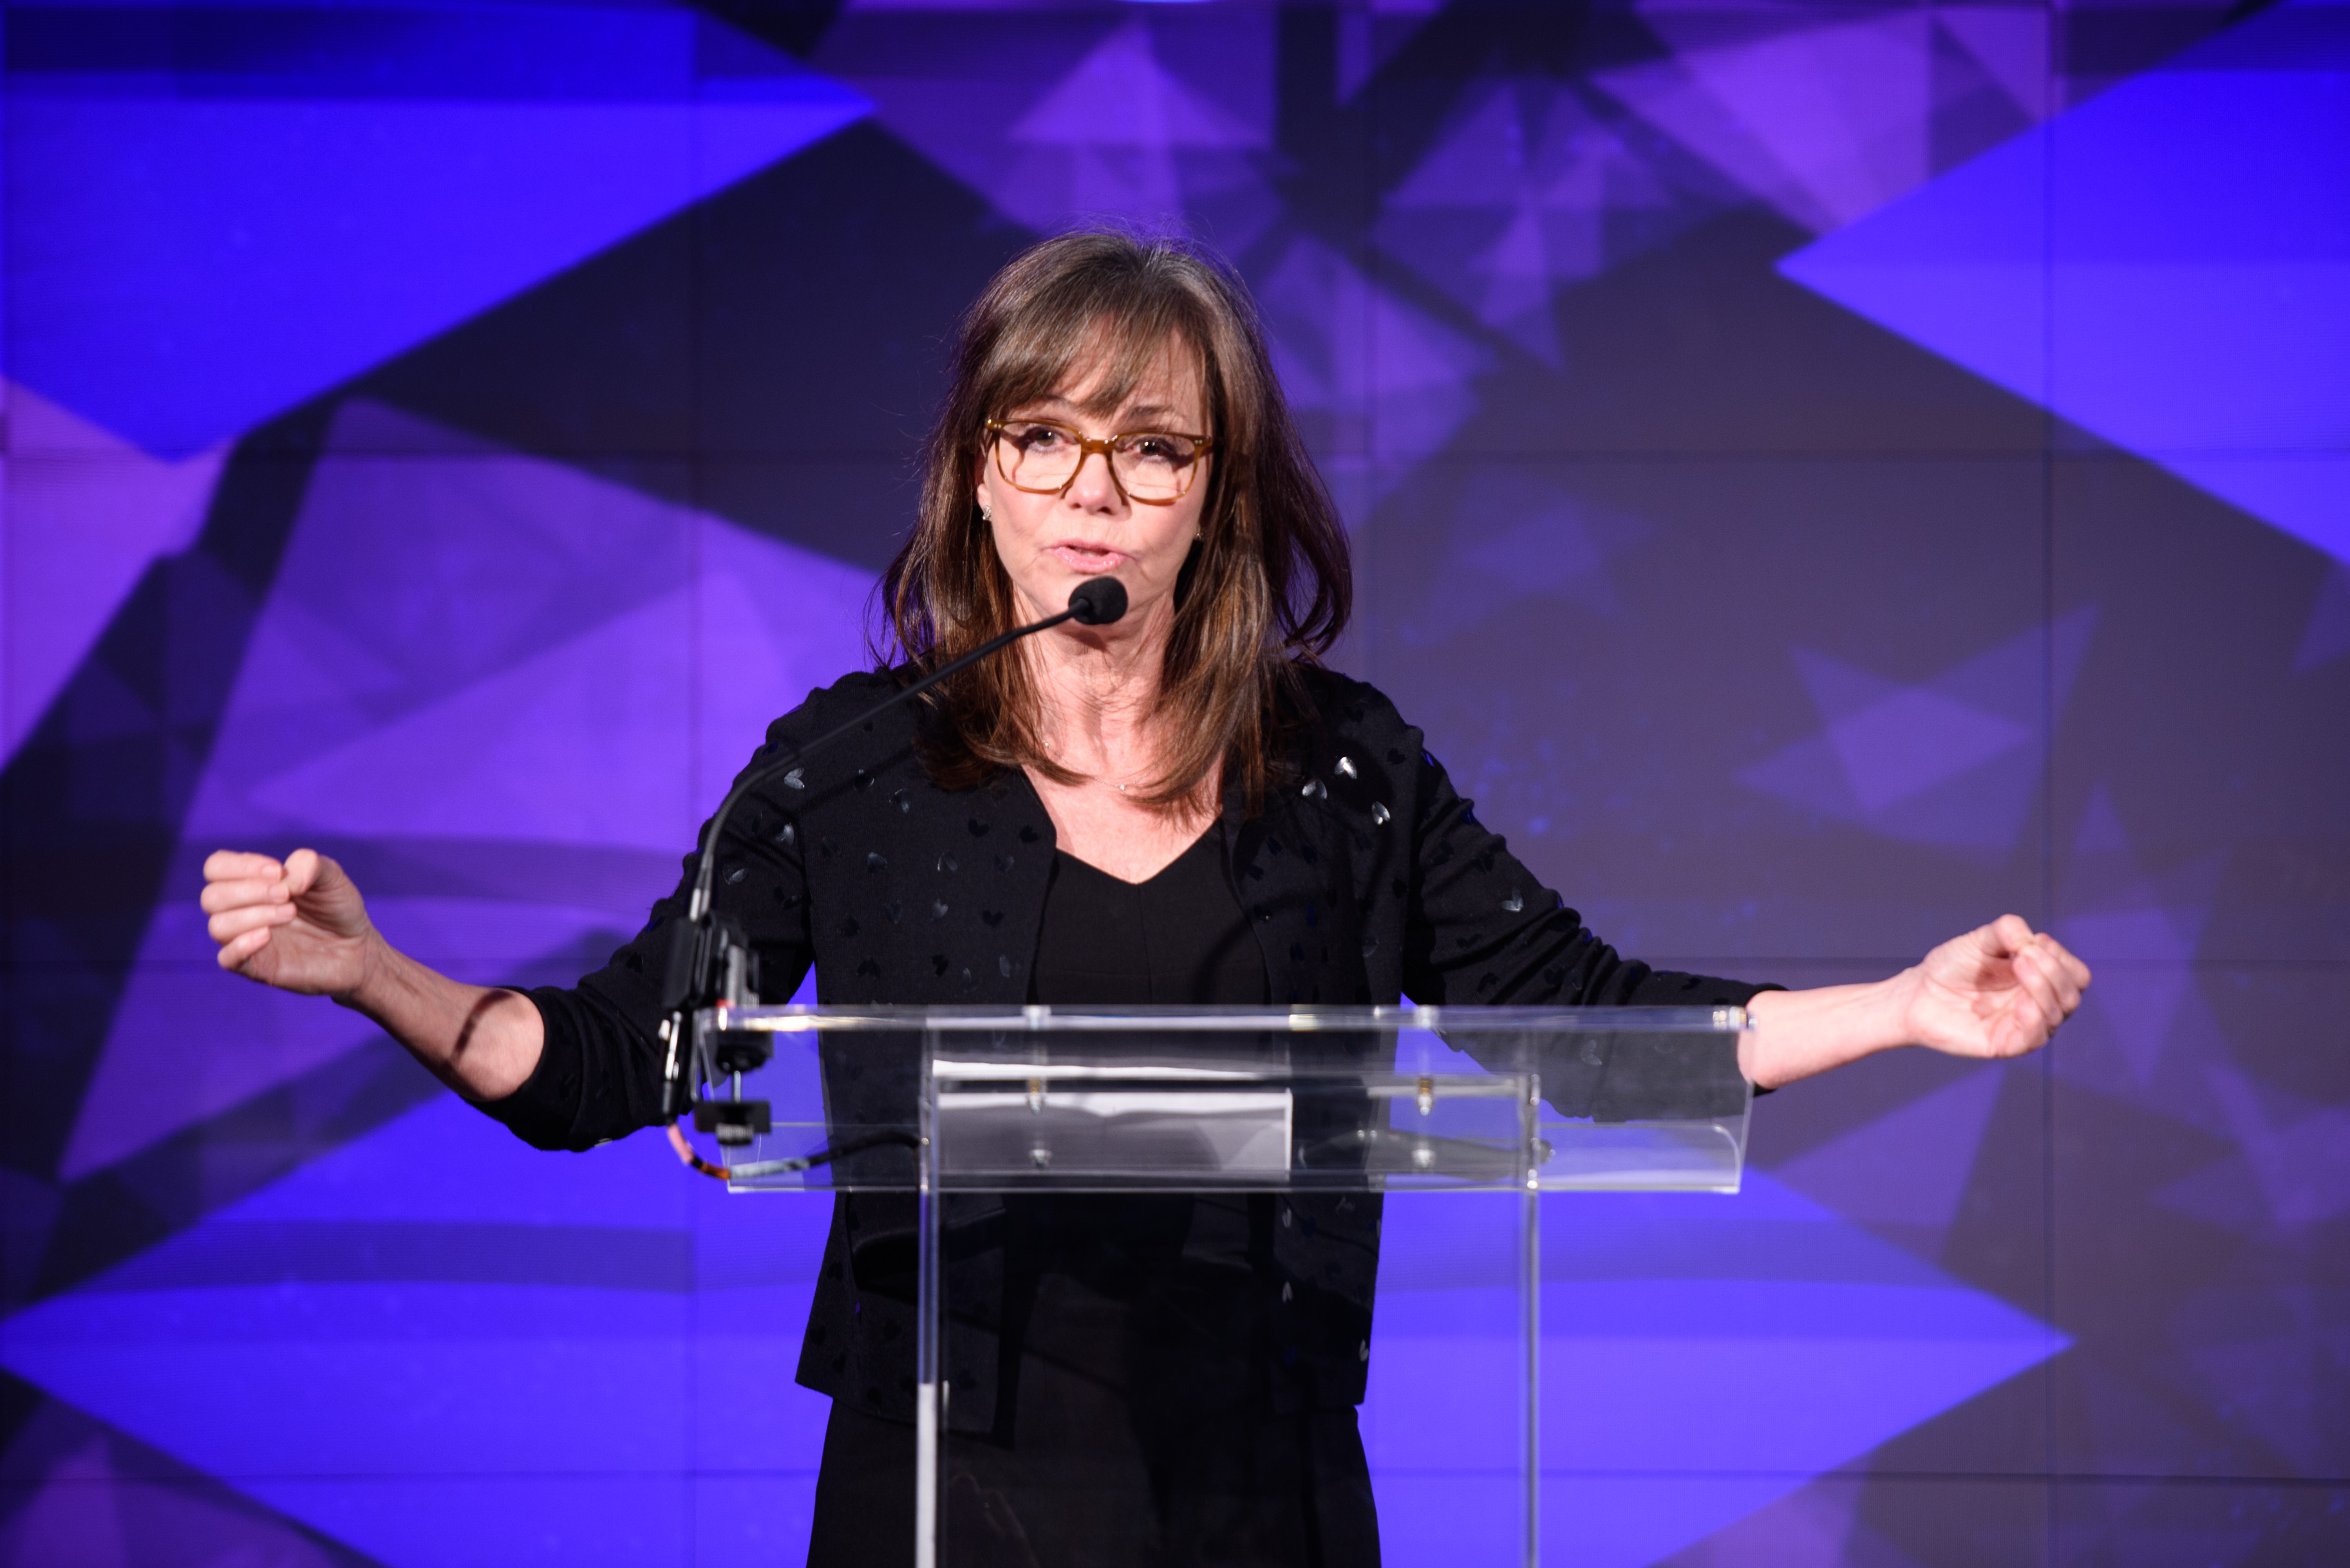 Sally Field speaks at the Voices of Solidarity at IAC HQ in New York City on December 5, 2016 | Source: Getty Images